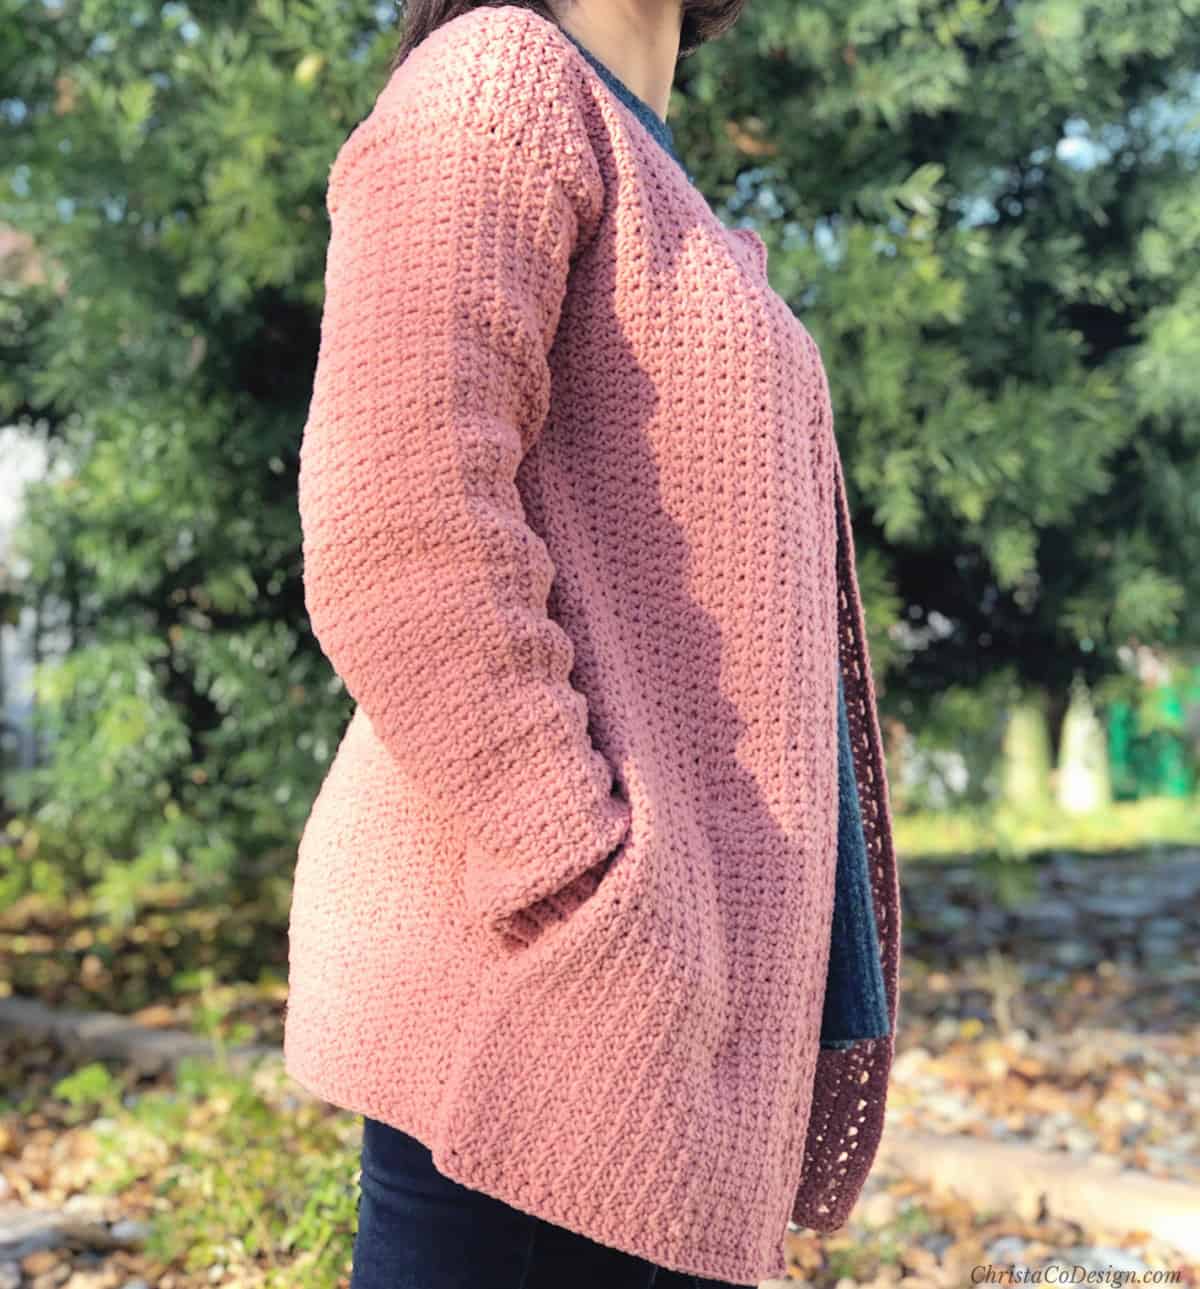 Woman with pink crochet cardigan on turned to side with hands in side seam pockets.